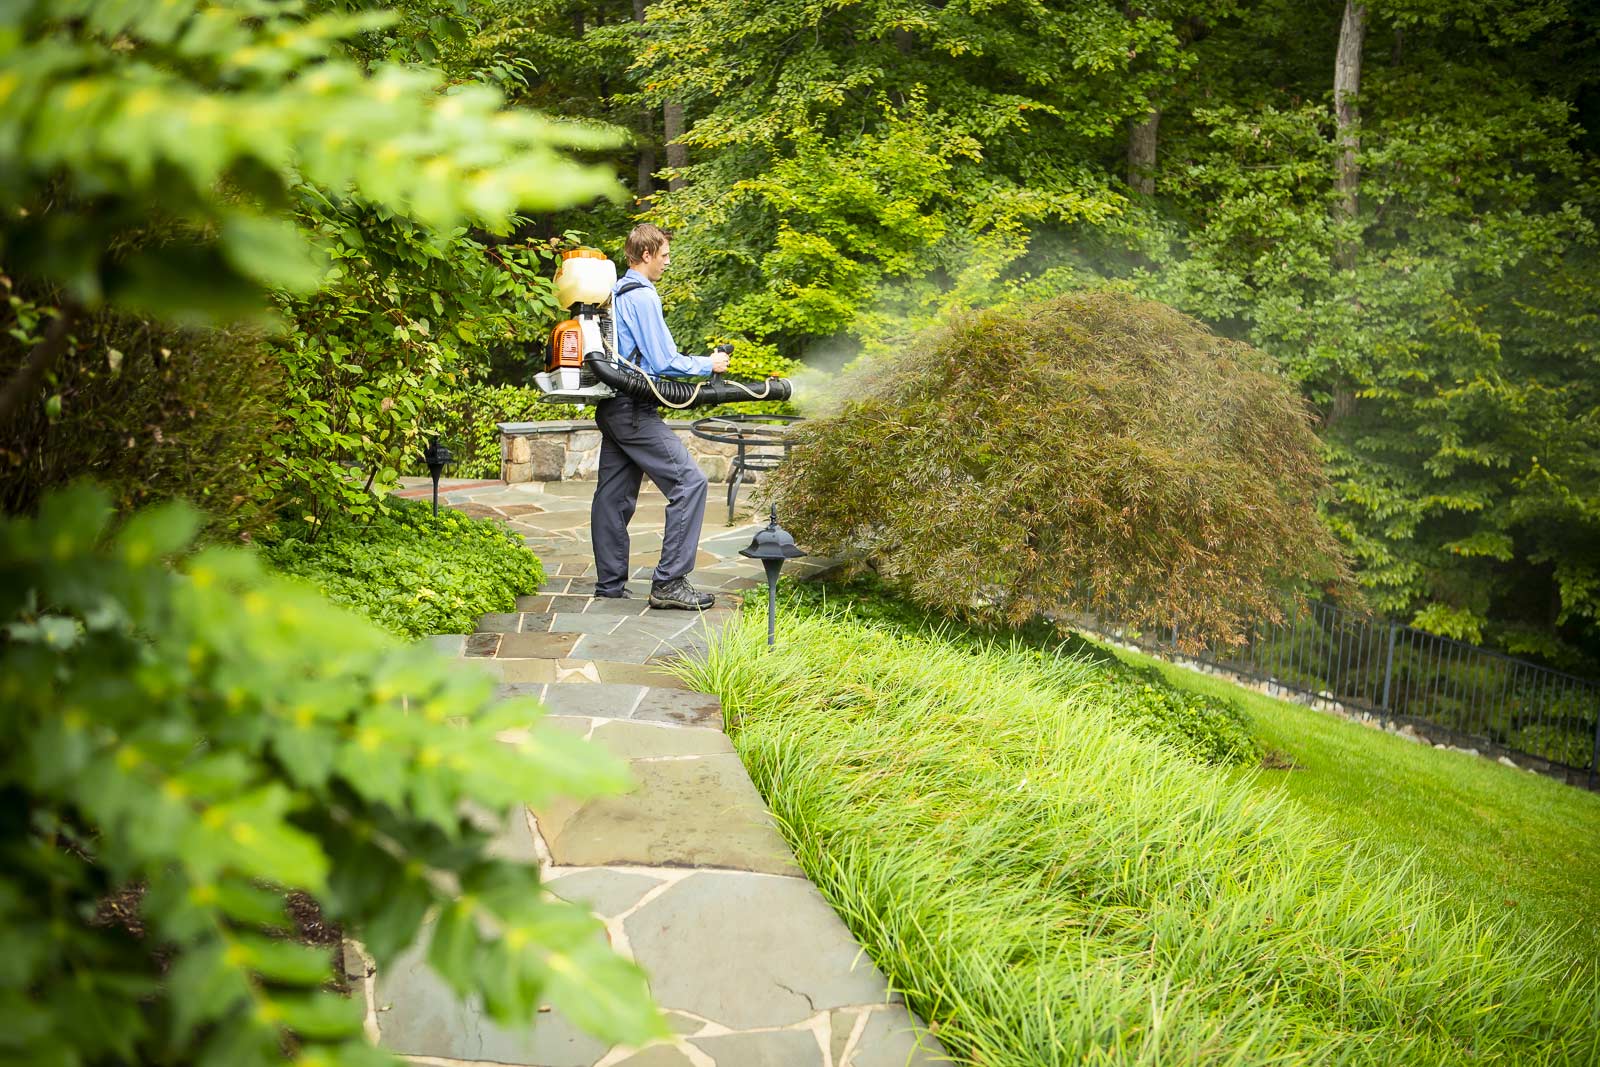 pest control technician spraying a landscape with mosquito barrier spray